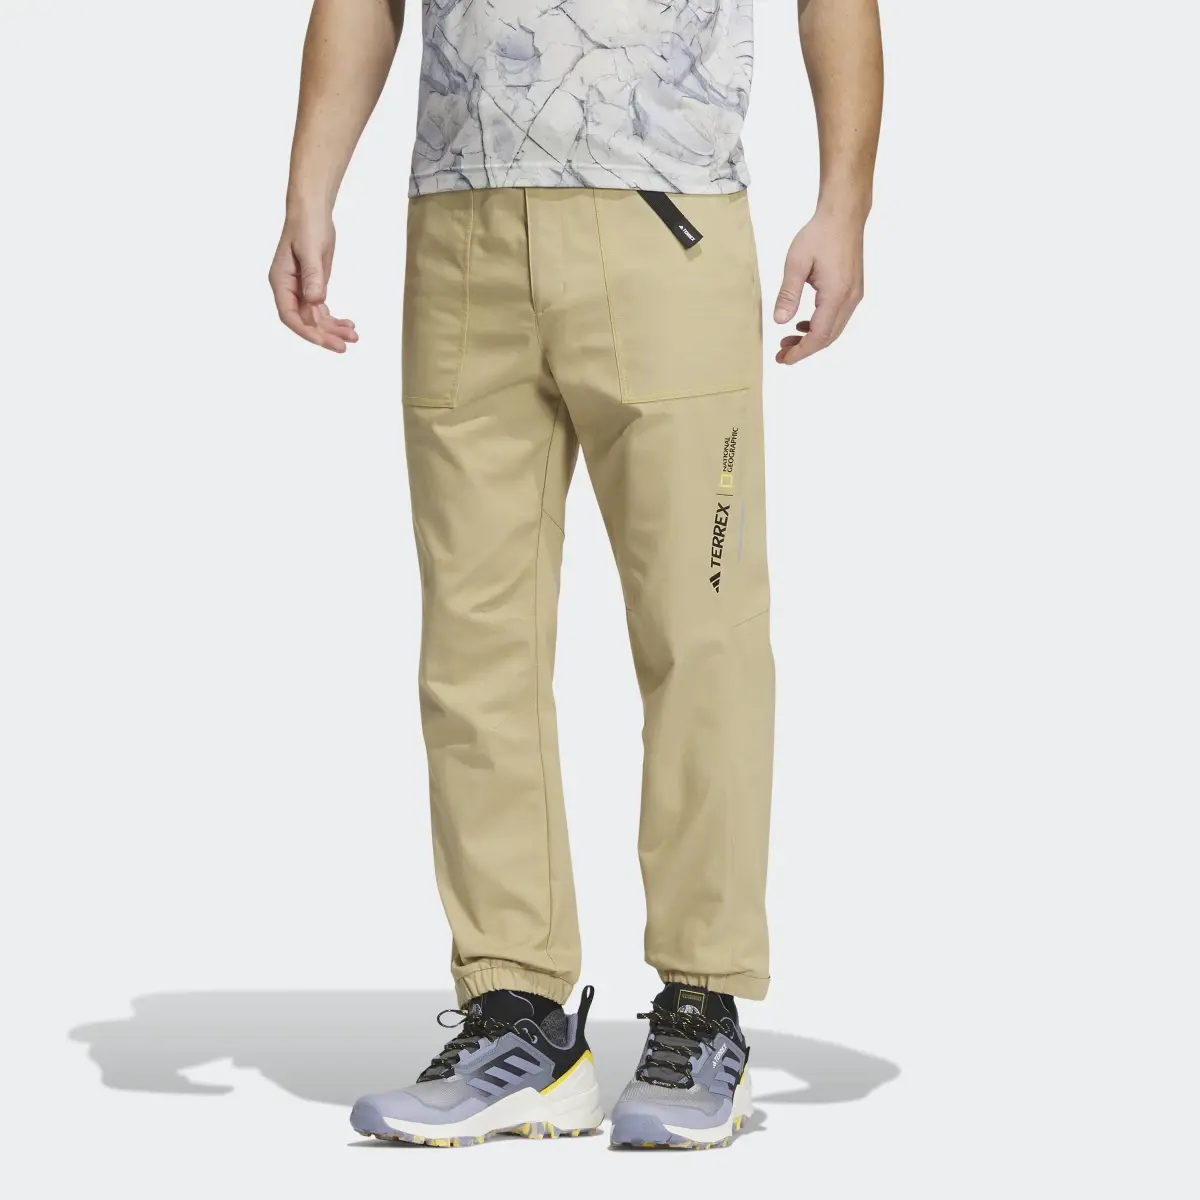 Adidas National Geographic Twill Pants. 1